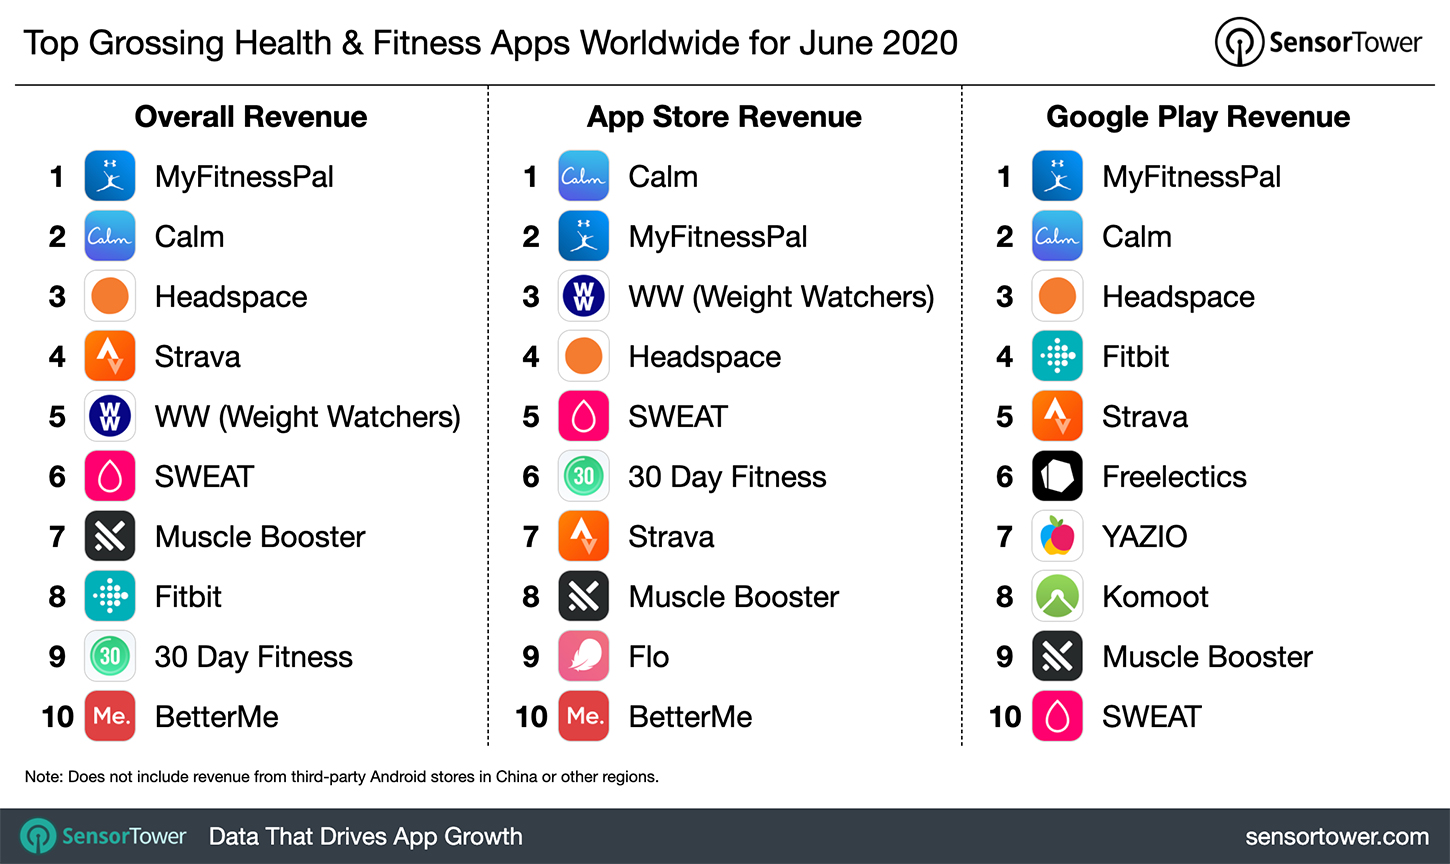 top-grossing-health-and-fitness-apps-worldwide-june-2020.jpg